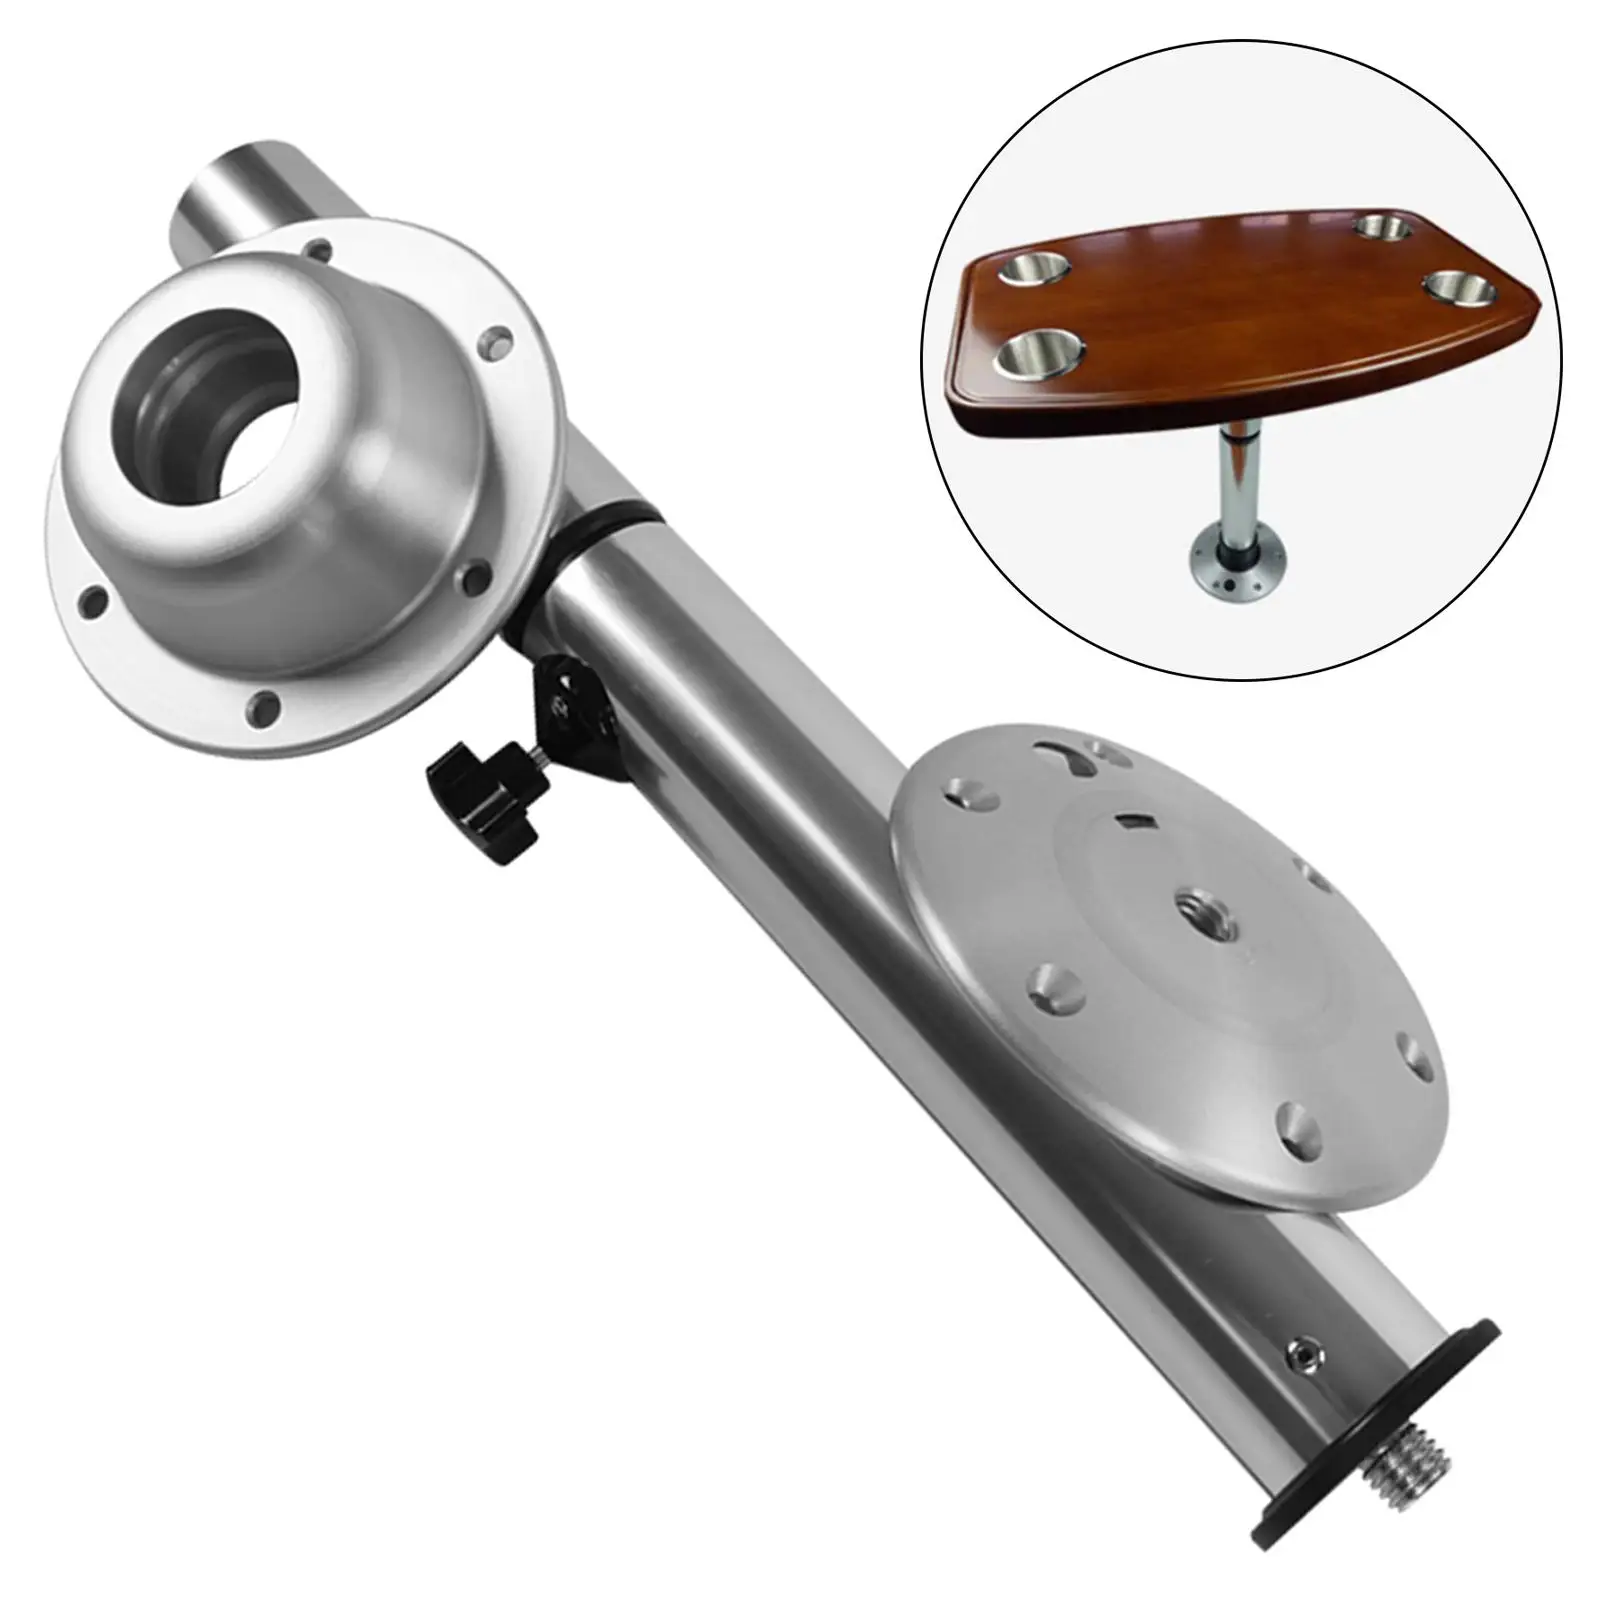 Breakfast Bar Leg with Mount Bases Part for Marine Boat Movable Universal for Motorhome Table Pedestal Worktop Support Table Leg